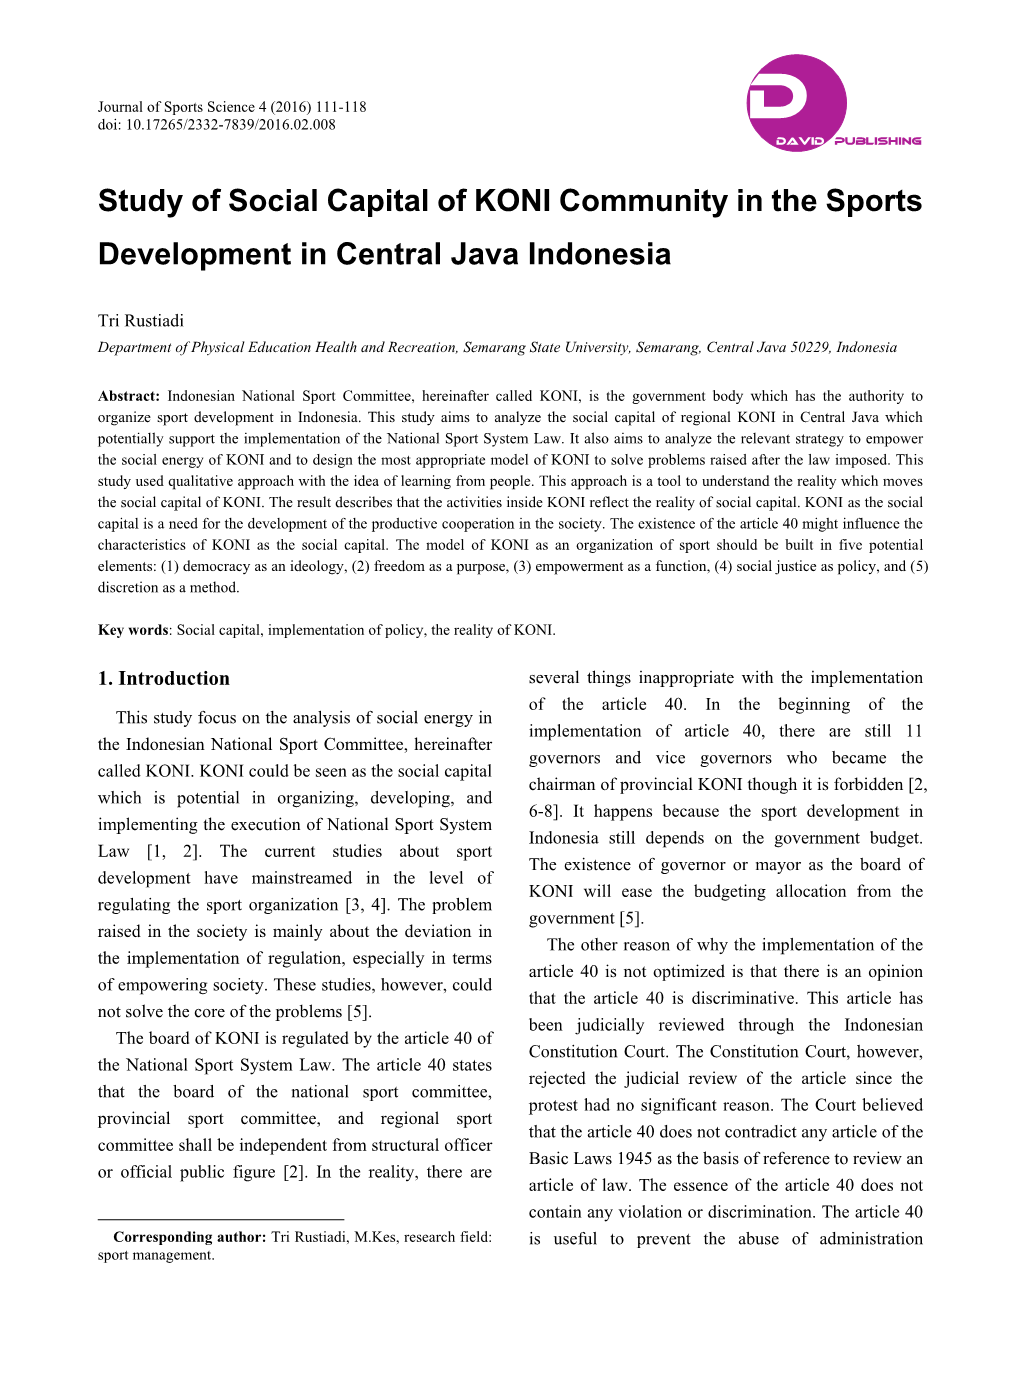 Study of Social Capital of KONI Community in the Sports Development in Central Java Indonesia